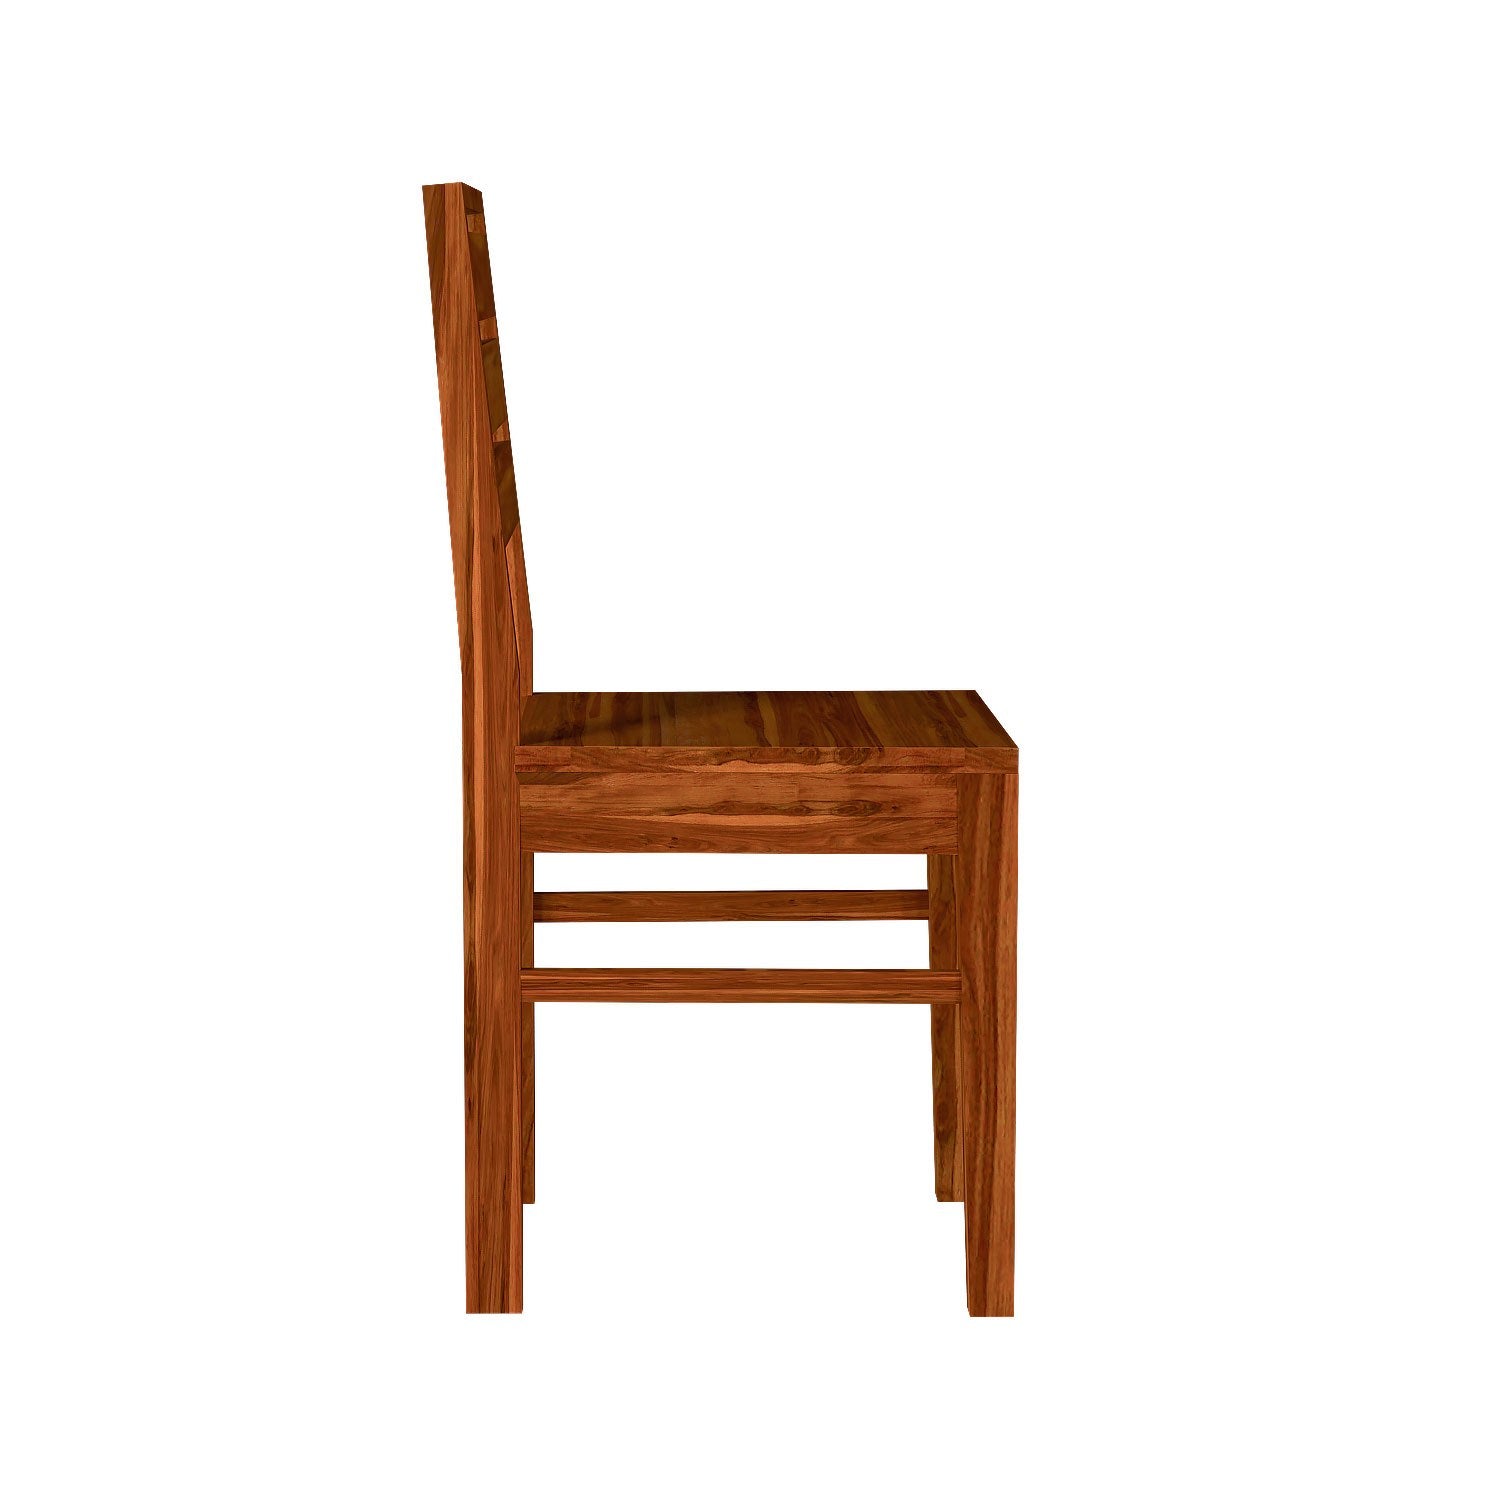 Feelinn Solid Sheesham Wood Chair (Without Cushion, Natural Finish)